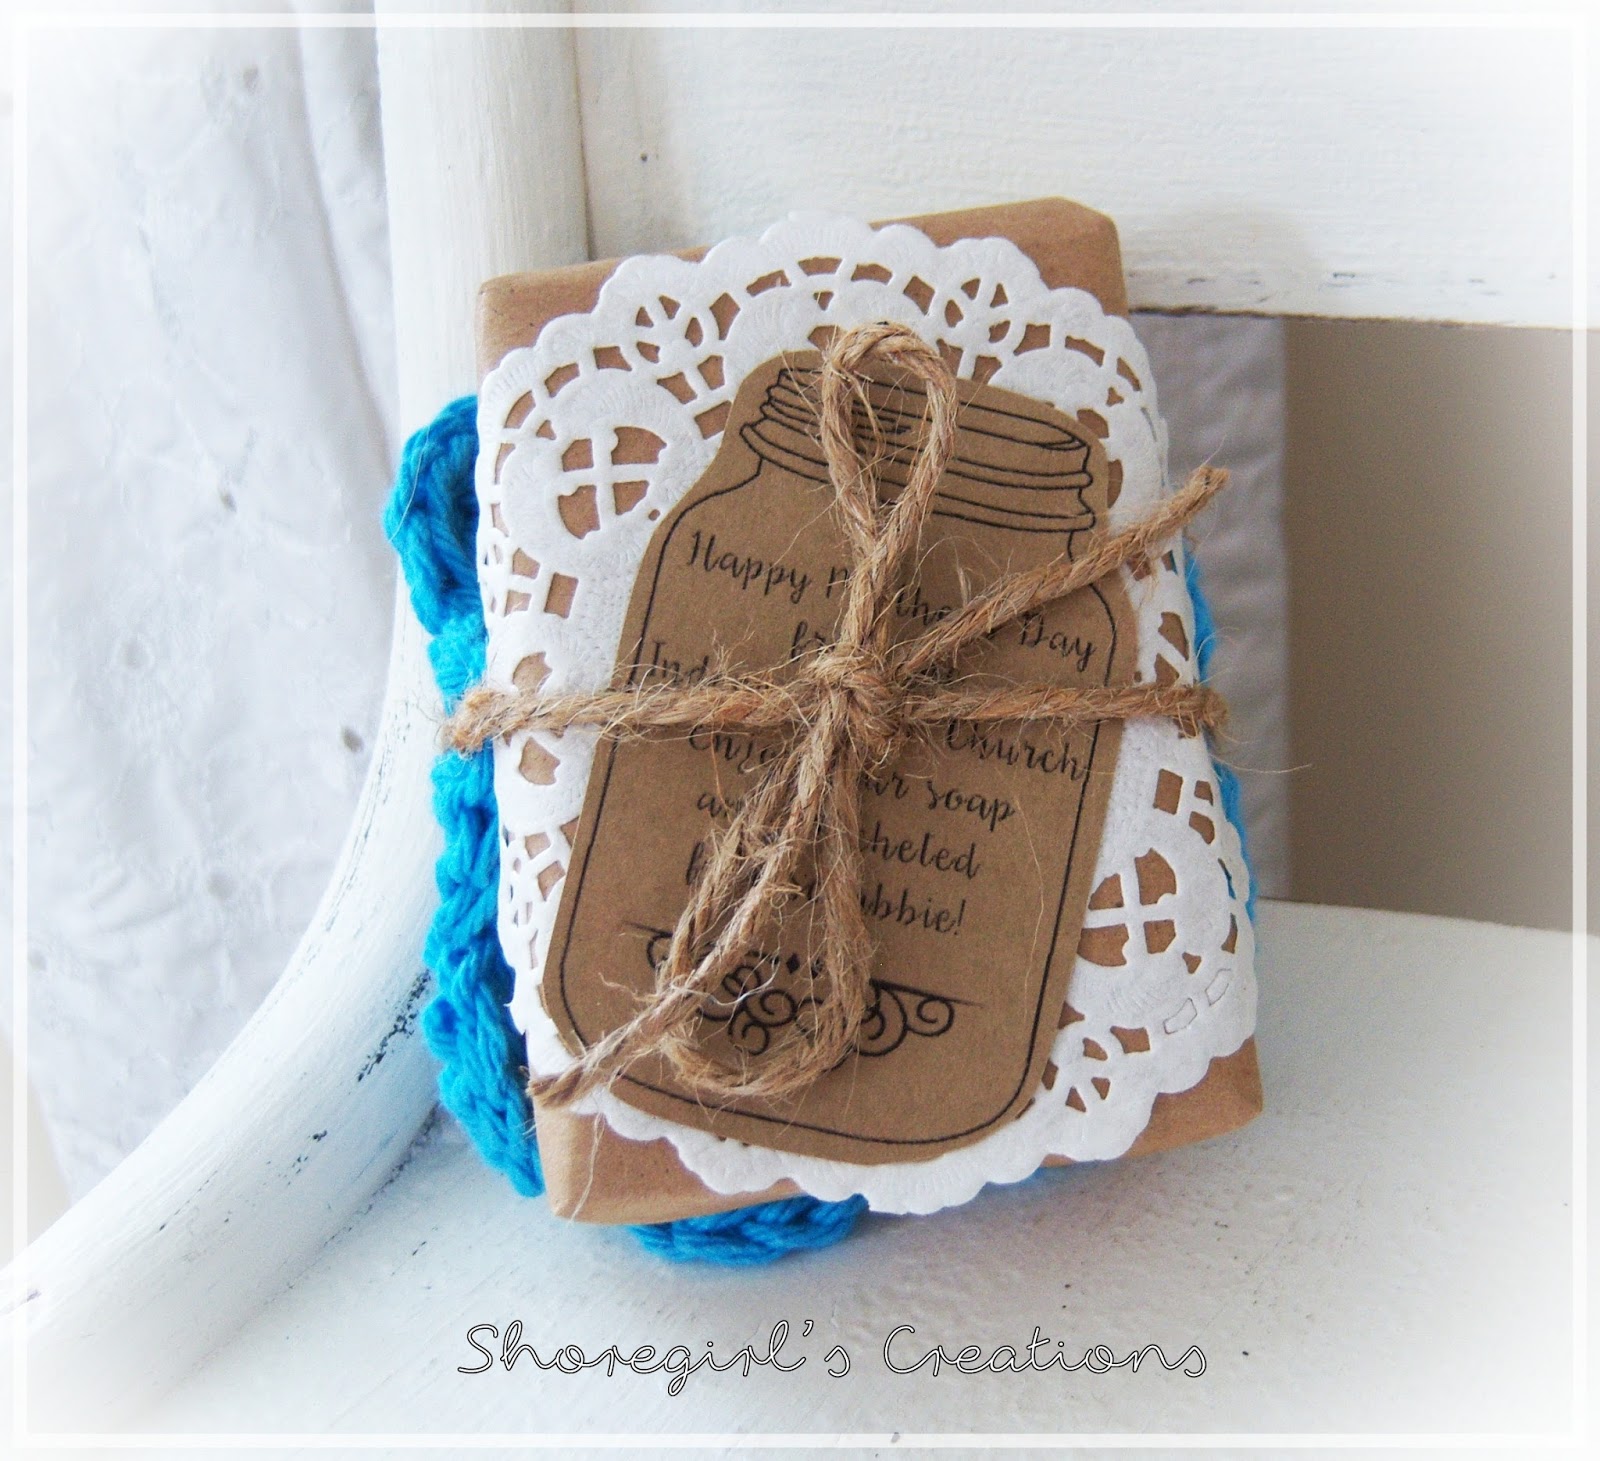 shoregirl's creations: mother's day gifts